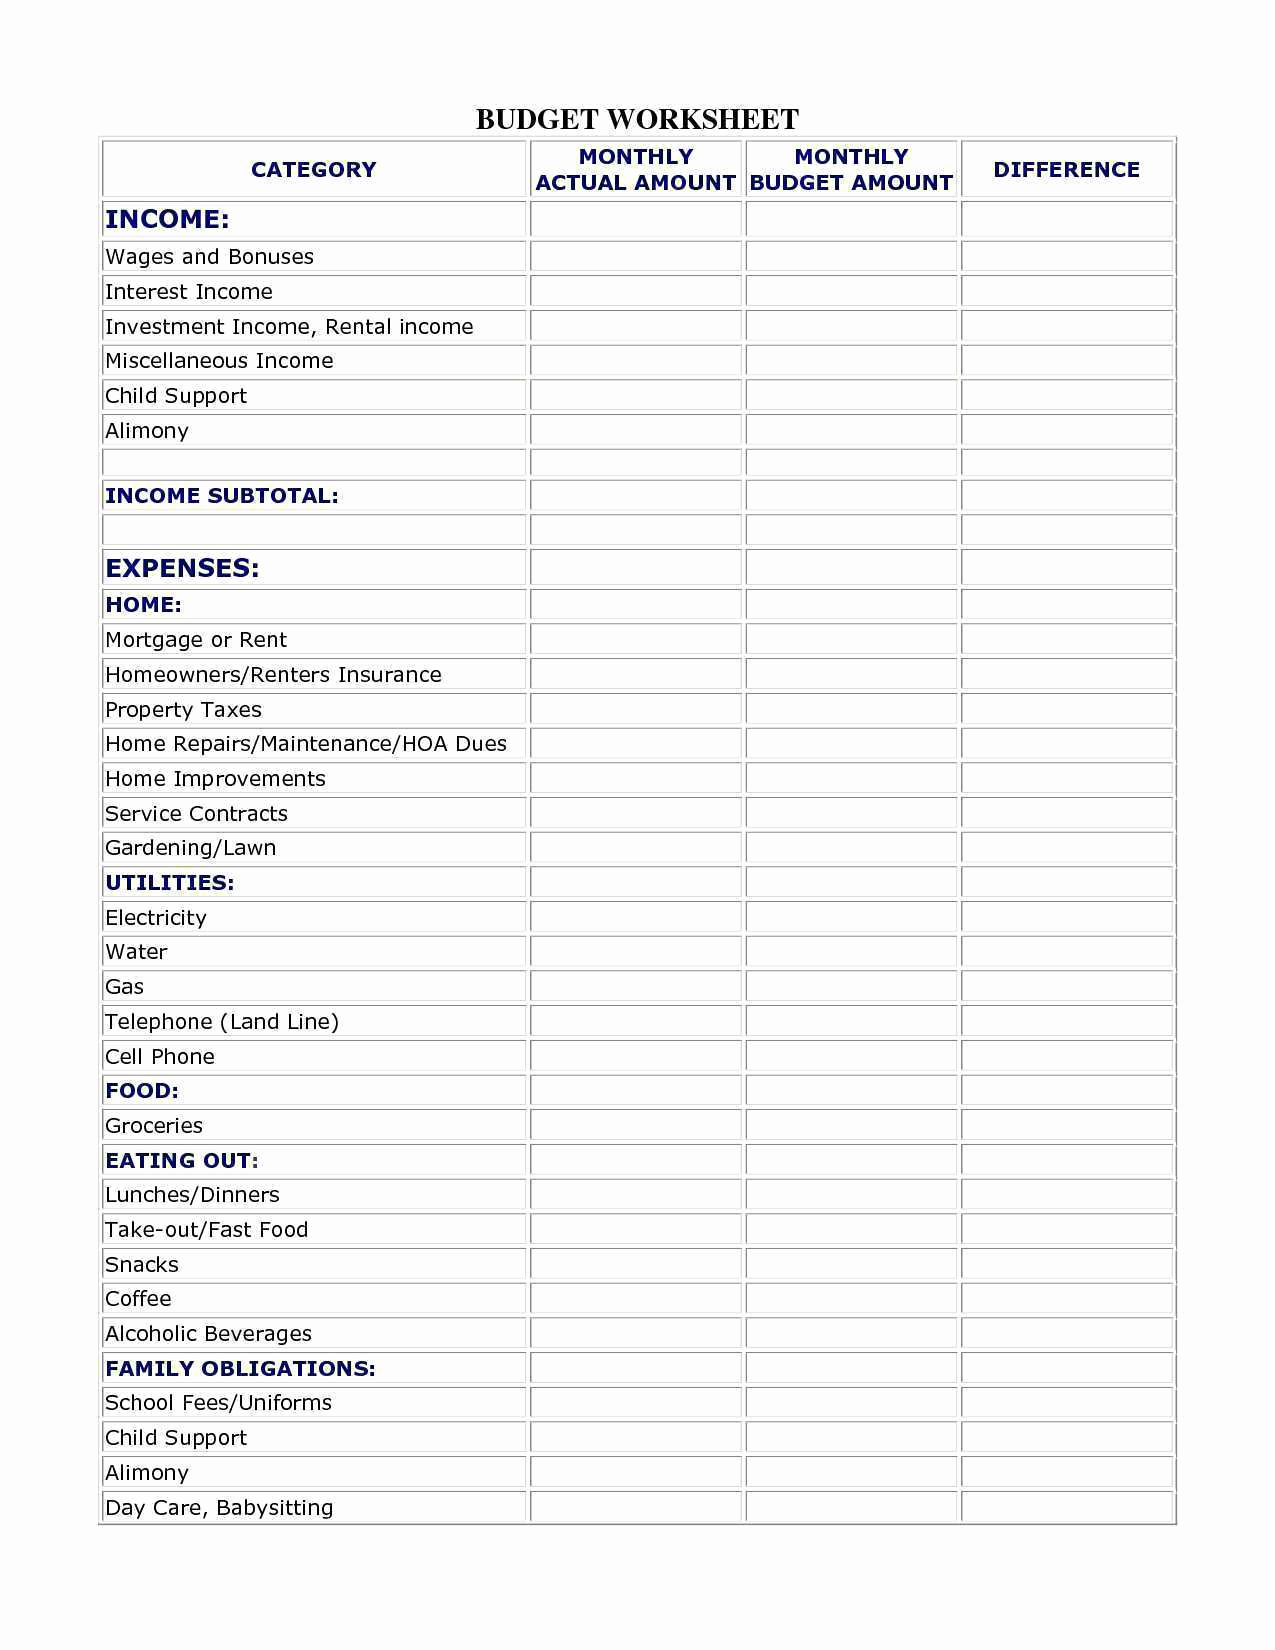 Lawn Care Schedule Spreadsheet in Home Maintenance Schedule Spreadsheet Elegant Home Maintenance